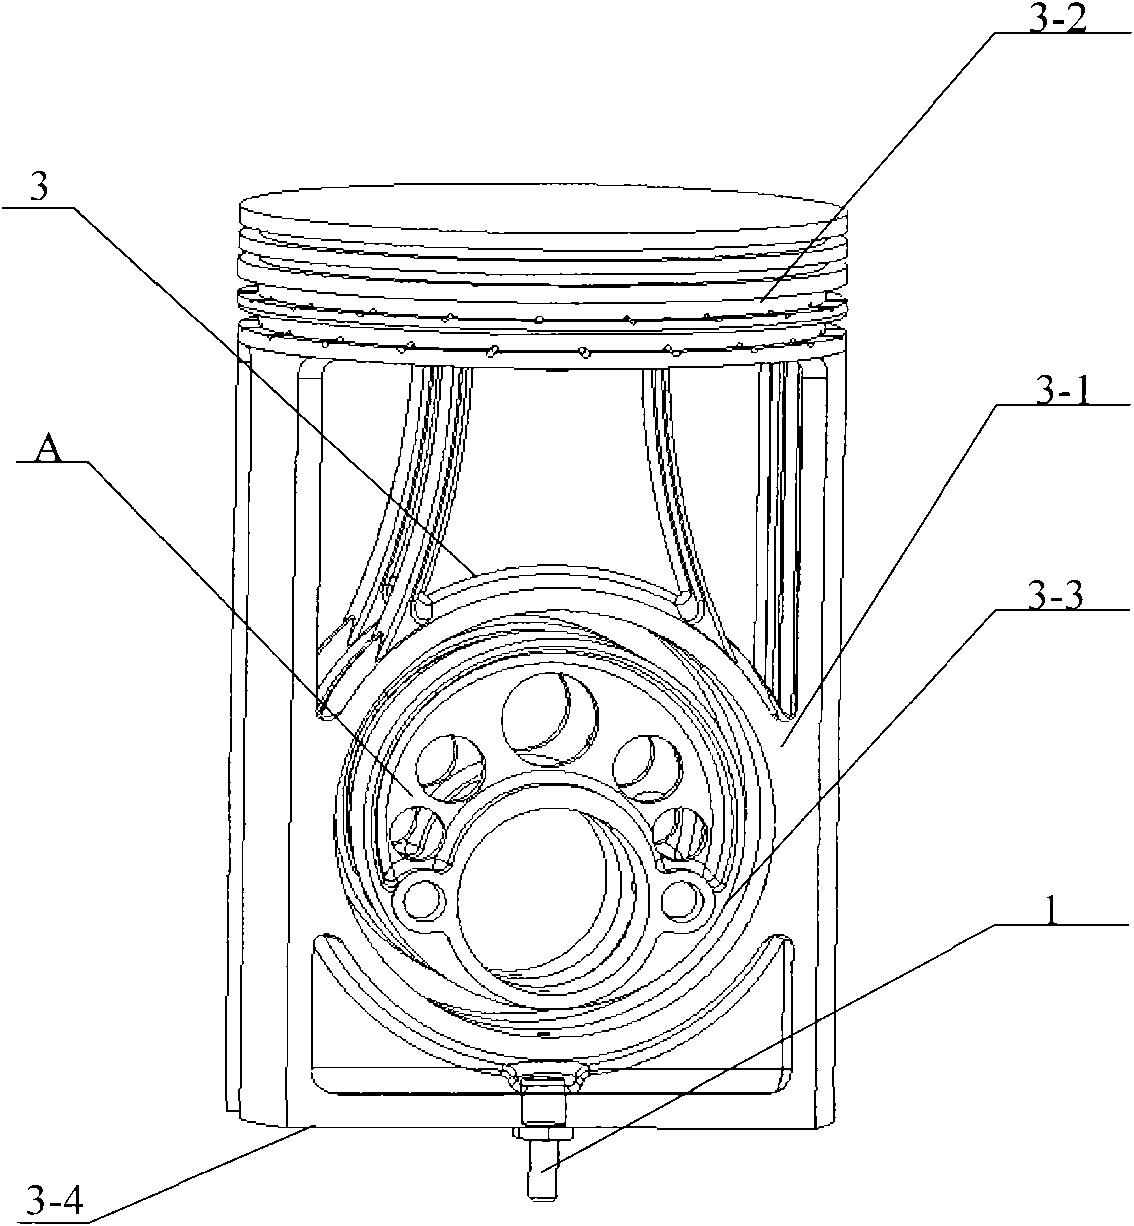 Oil pump and equipment for connecting rod-free reciprocating-rotating movement conversion mechanism